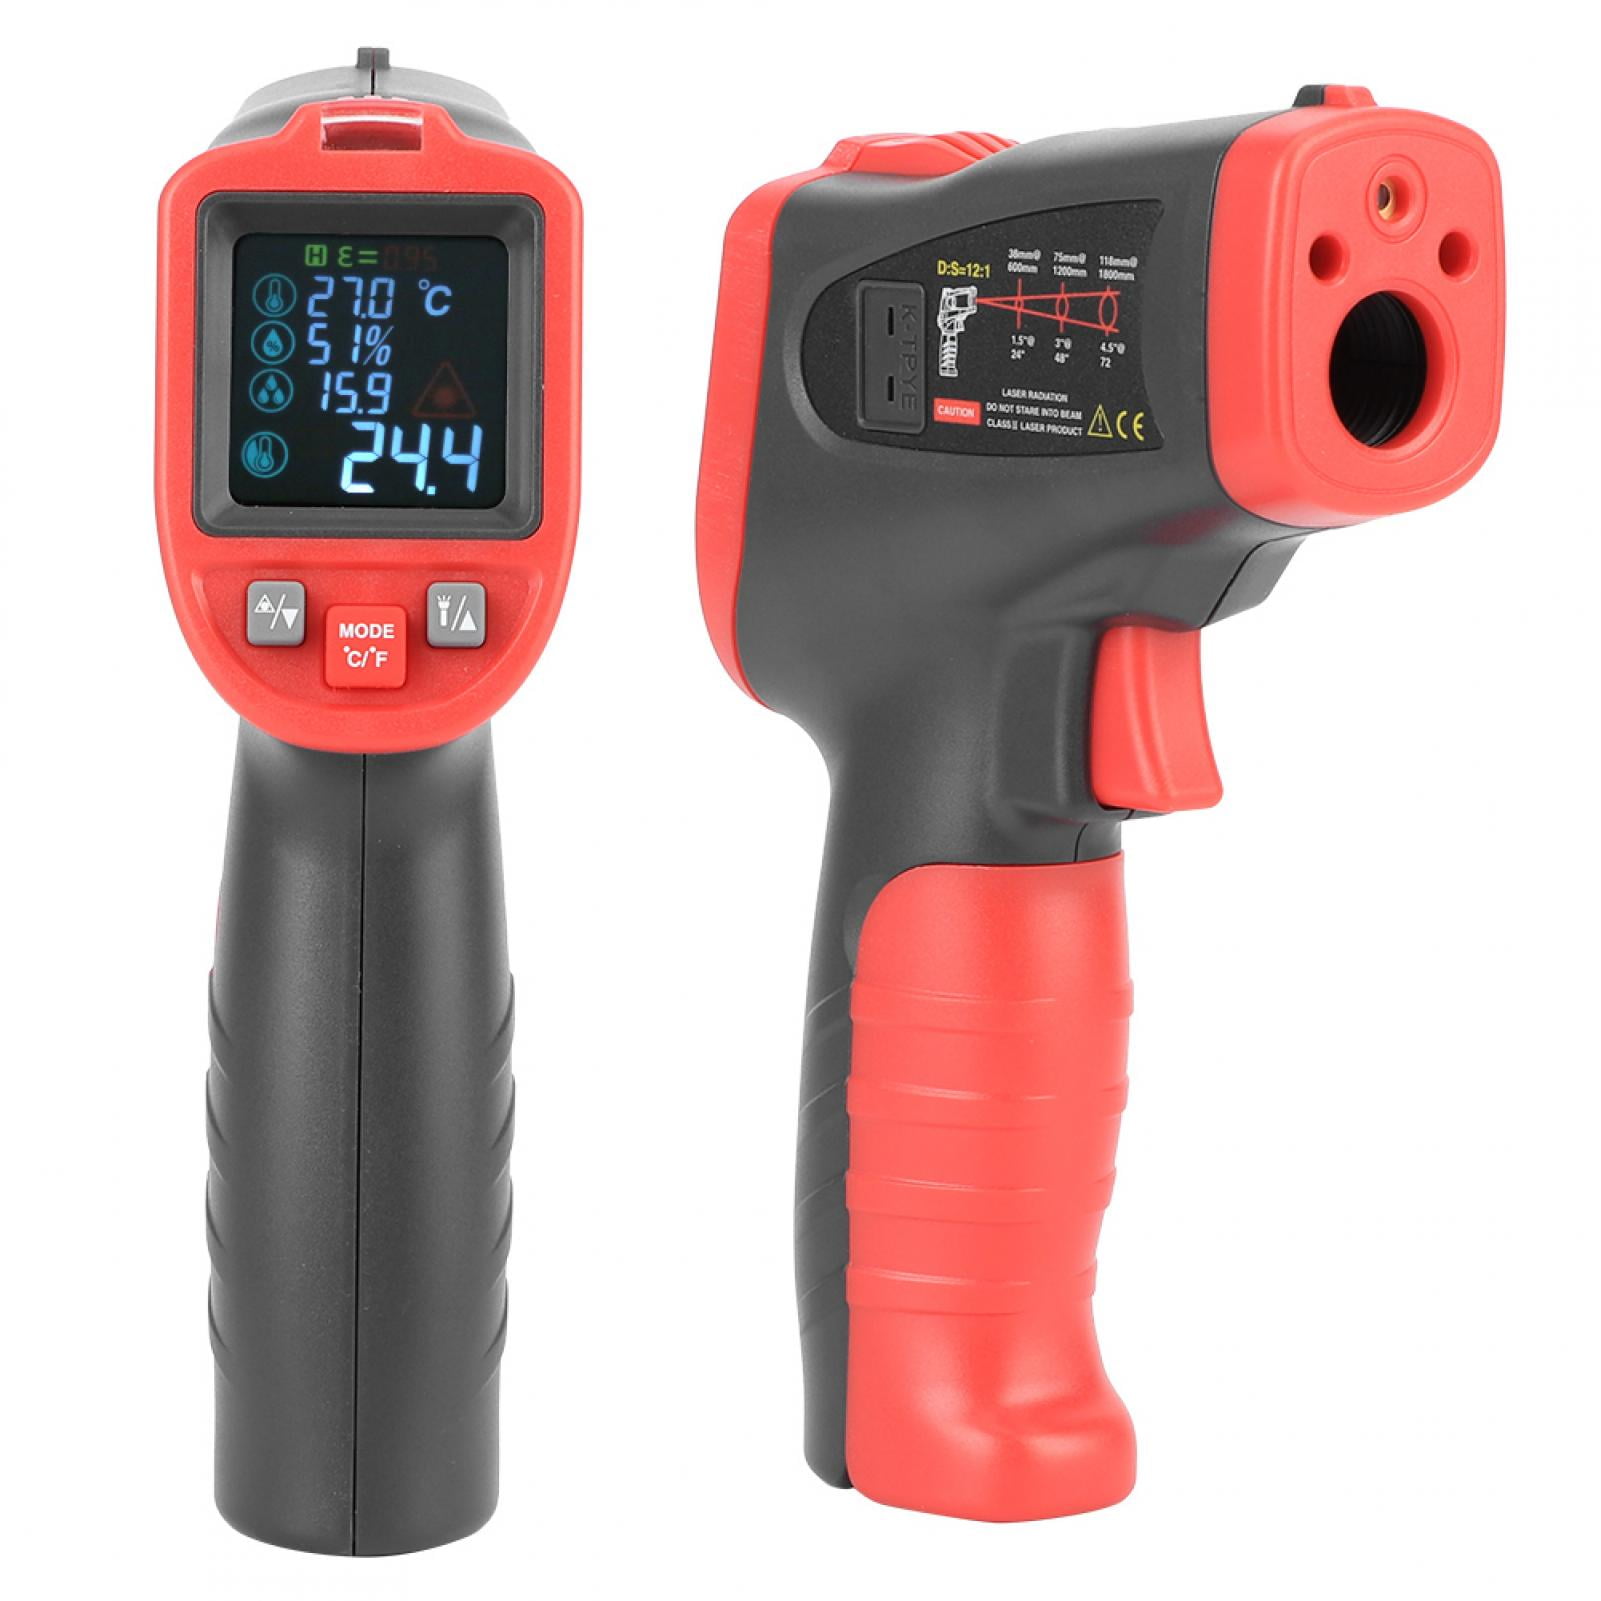 GM550 Digital LCD Non-contact Infrared IR Thermometer Temperature Laser Gun Tool 